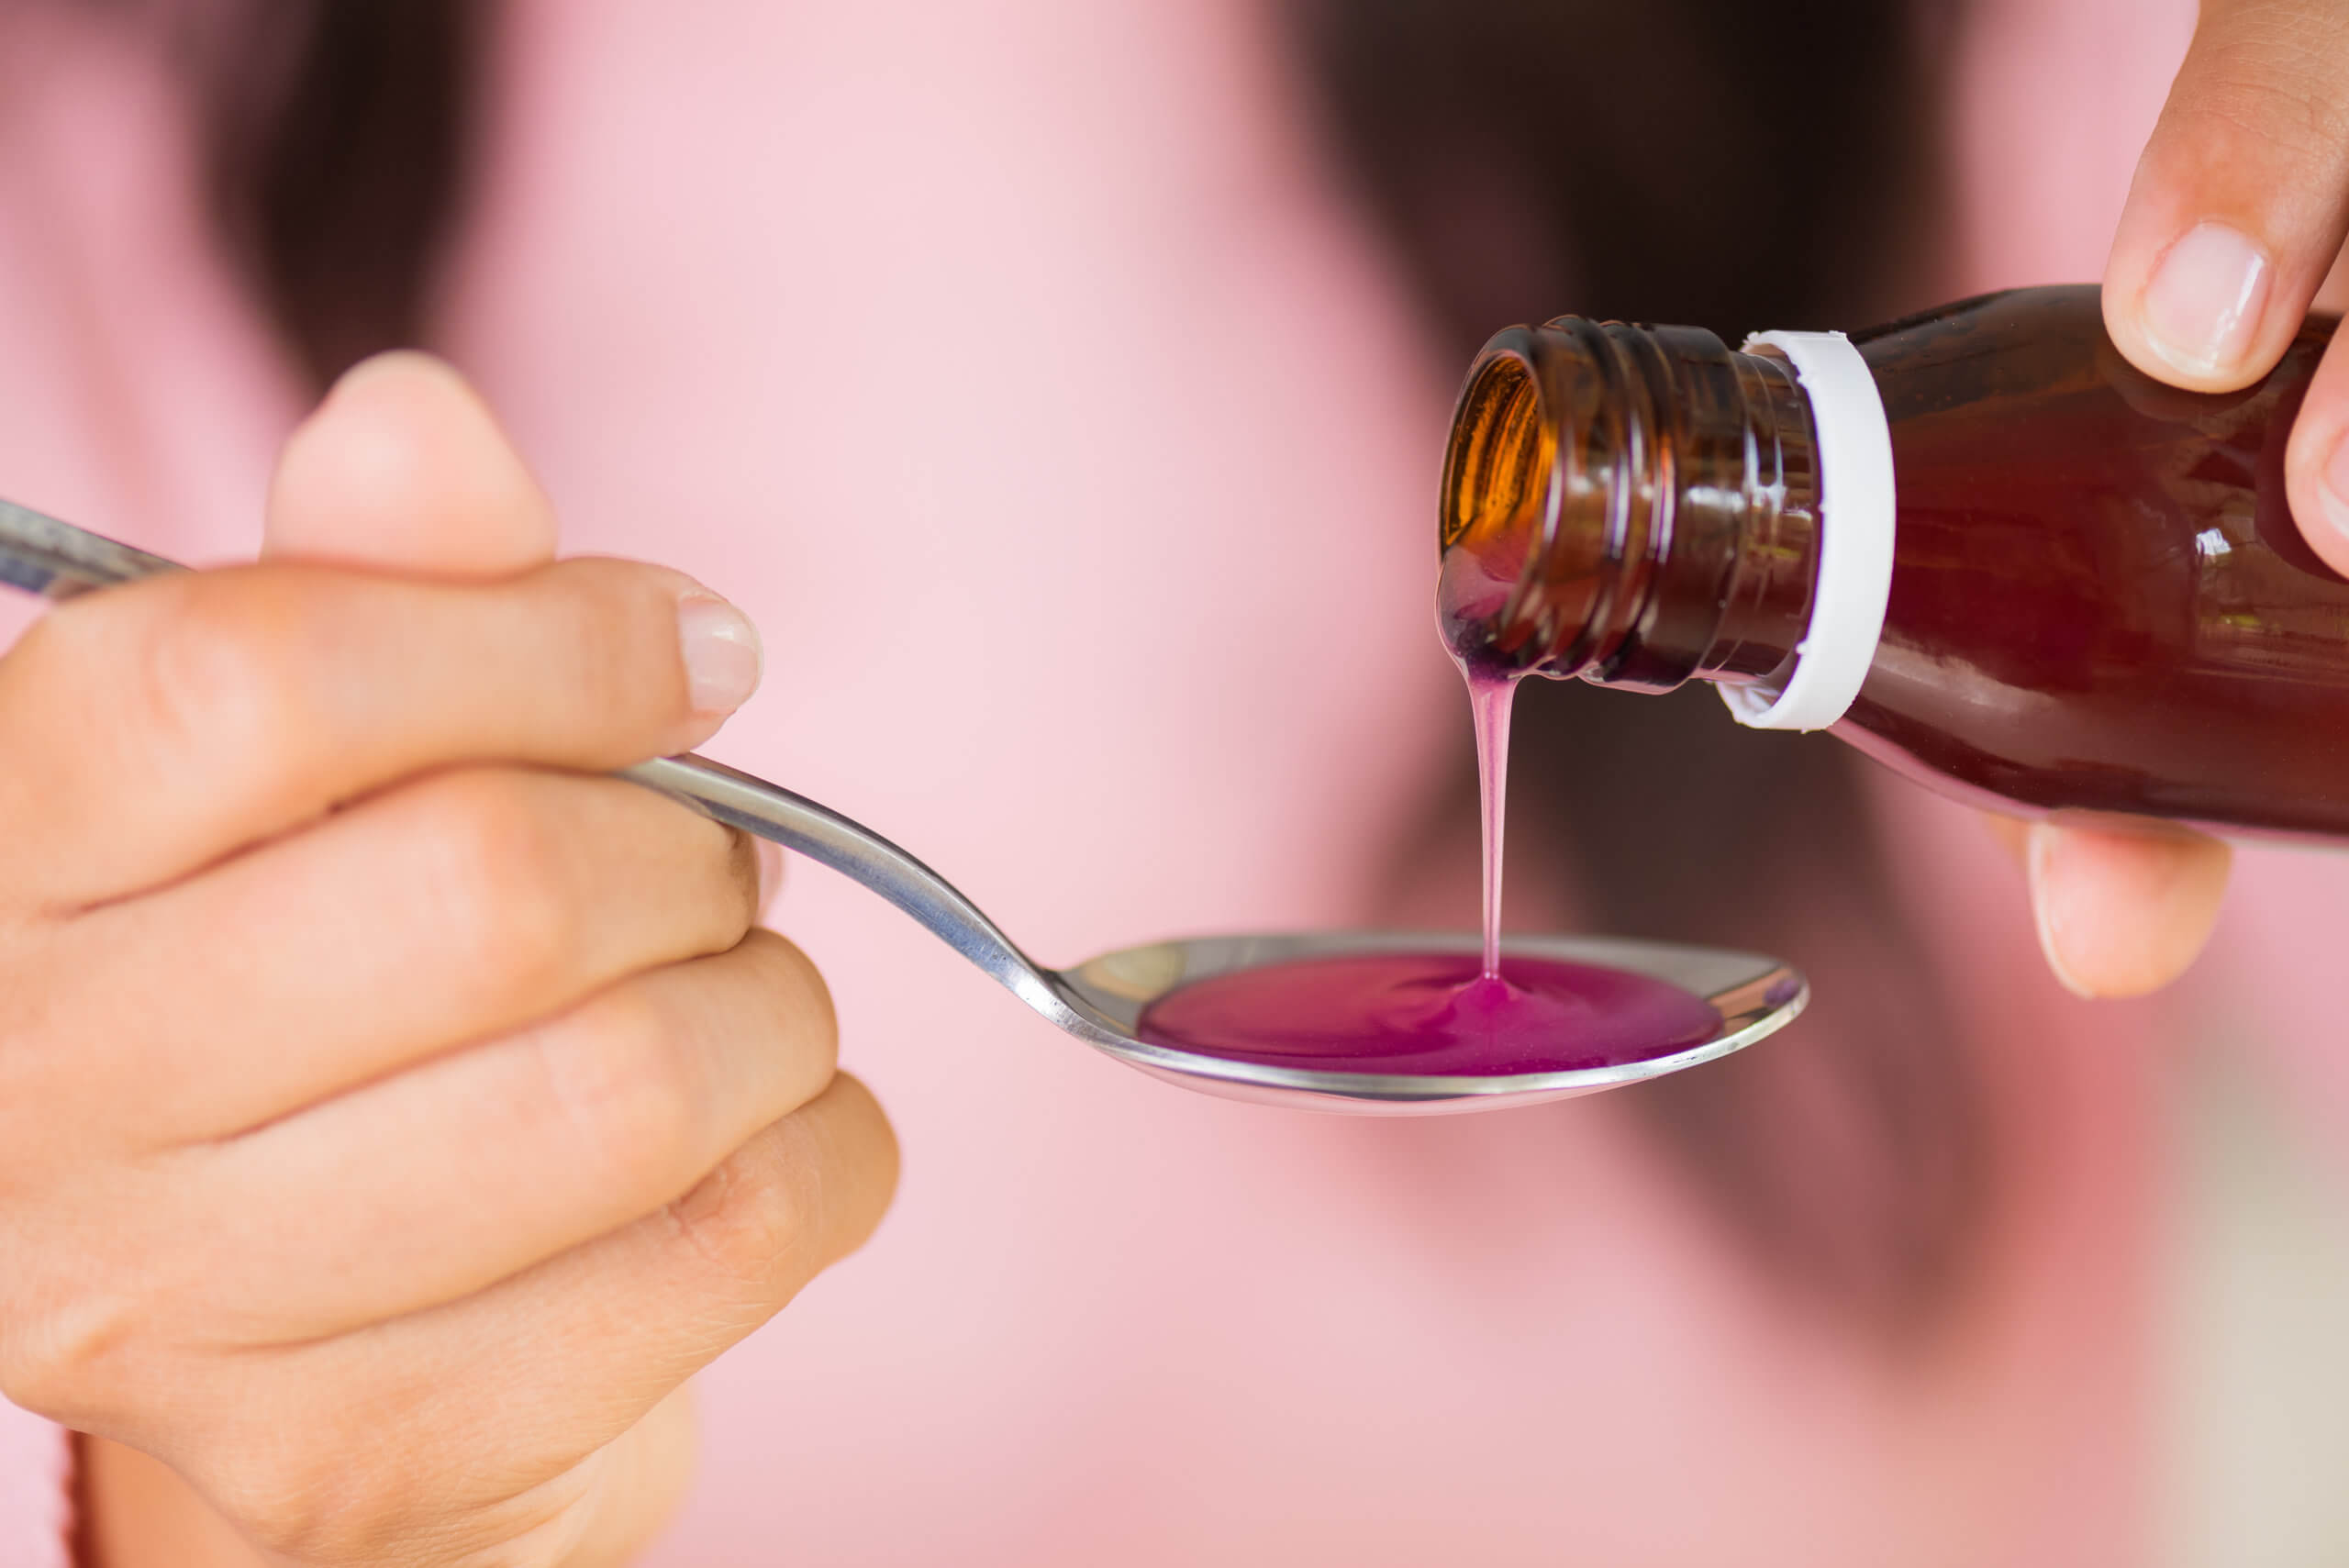 Can You Get Addicted to Cough Medicine?